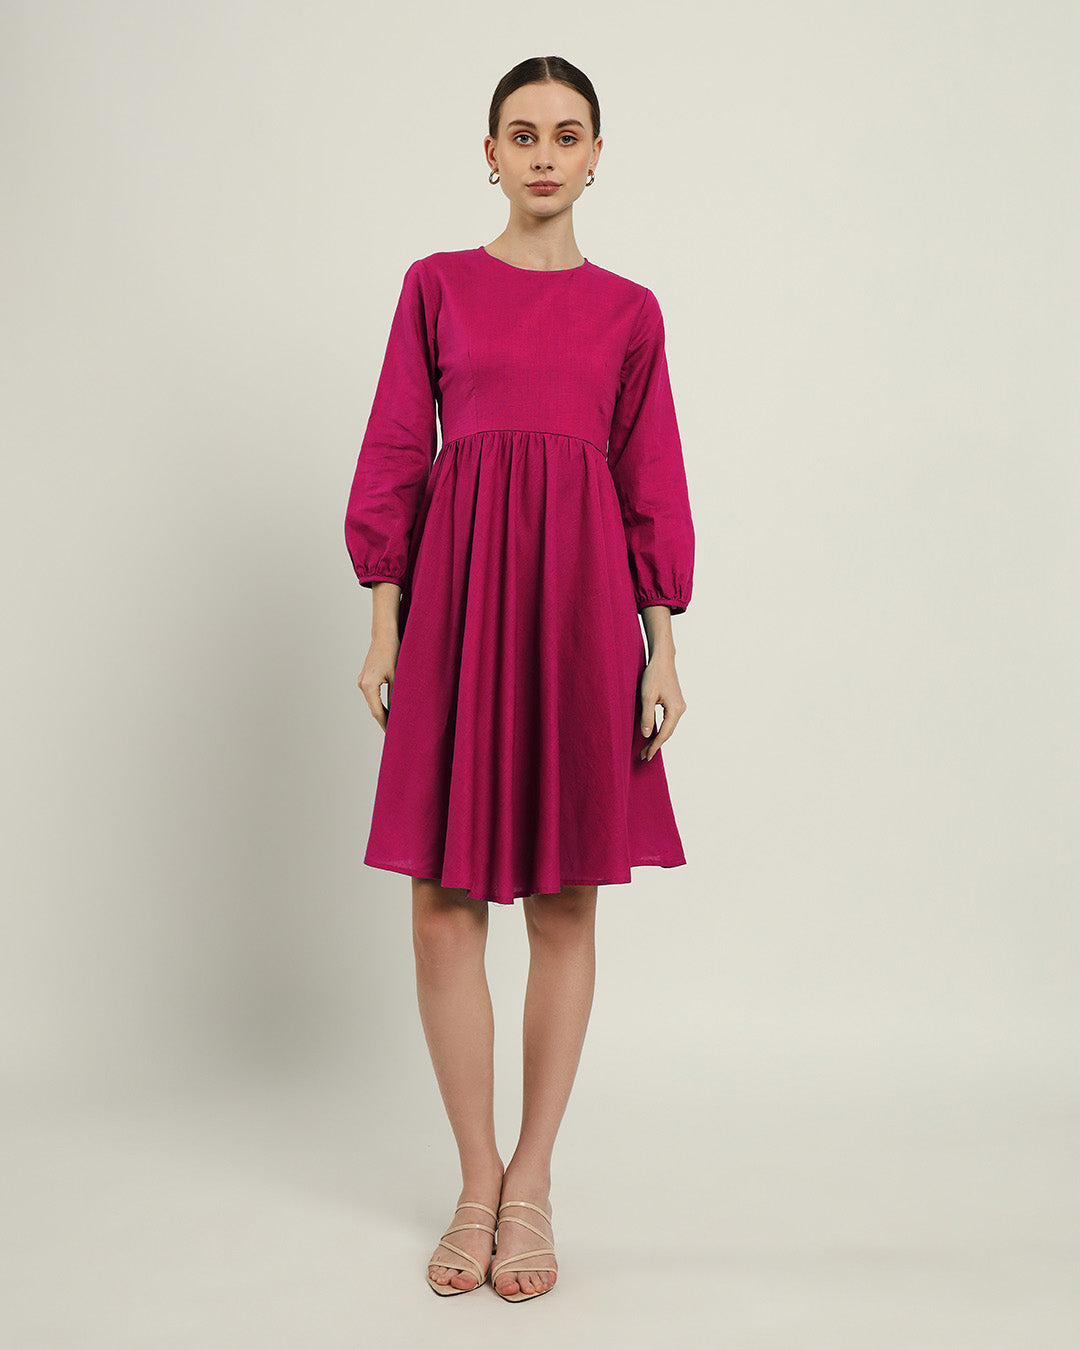 The Exeter Berry Dress